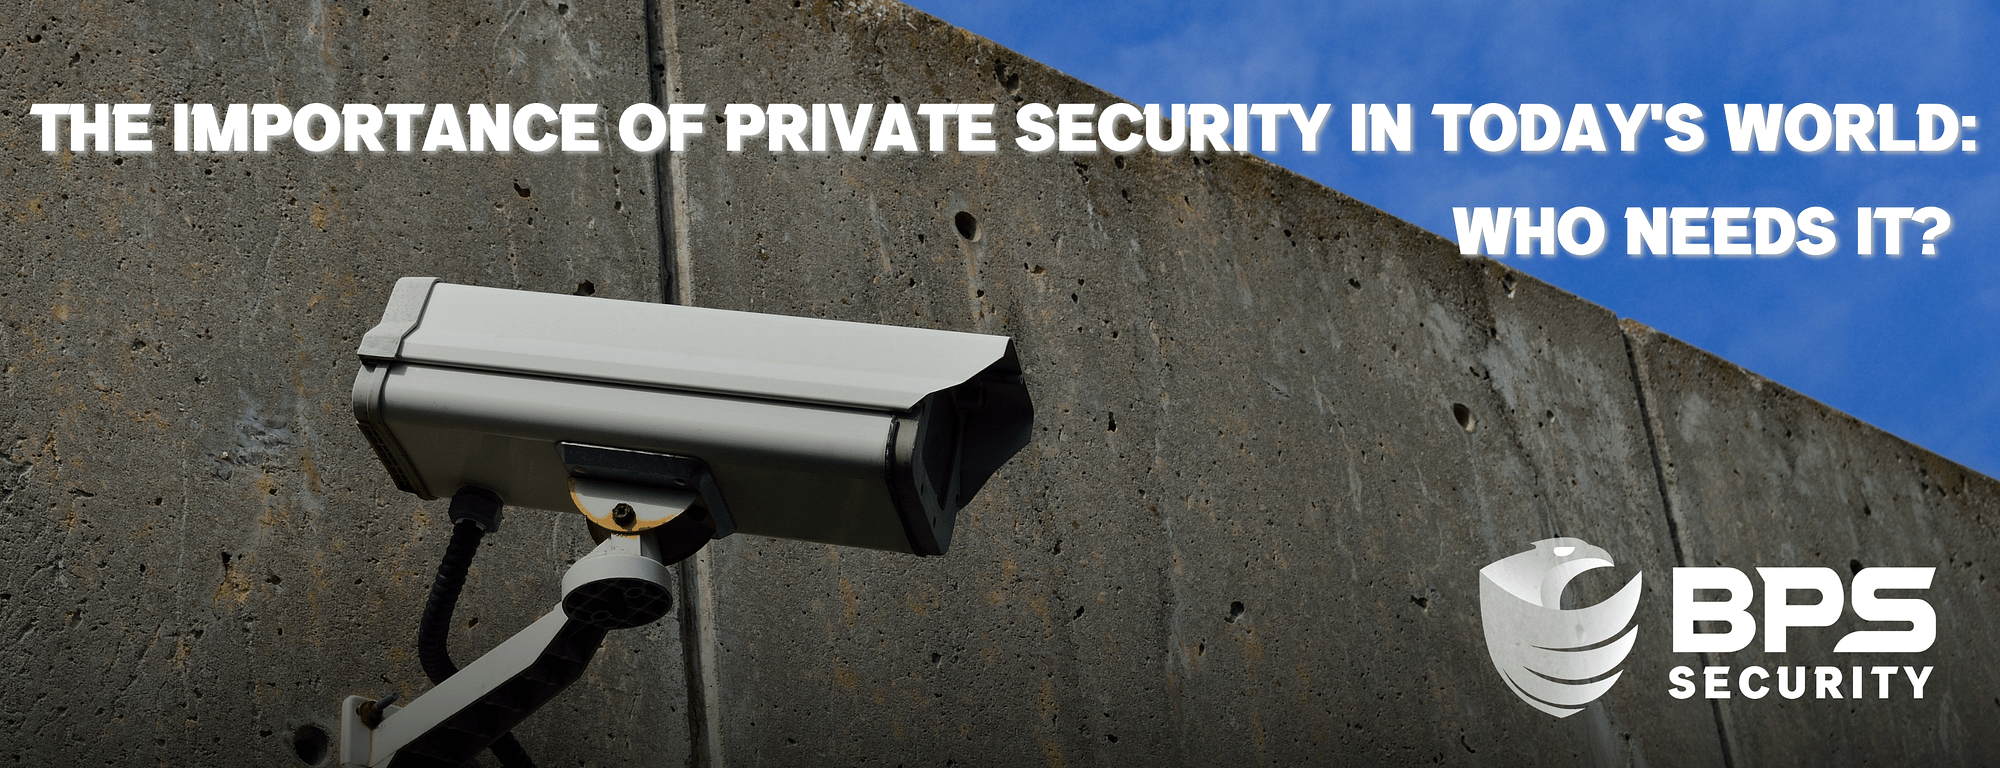 This is the header image for the BPS Security blog titled, “The Importance of Private Security in Today's World: Who Needs It?” This image shows the title below an outdoor security camera attached to a concrete wall.